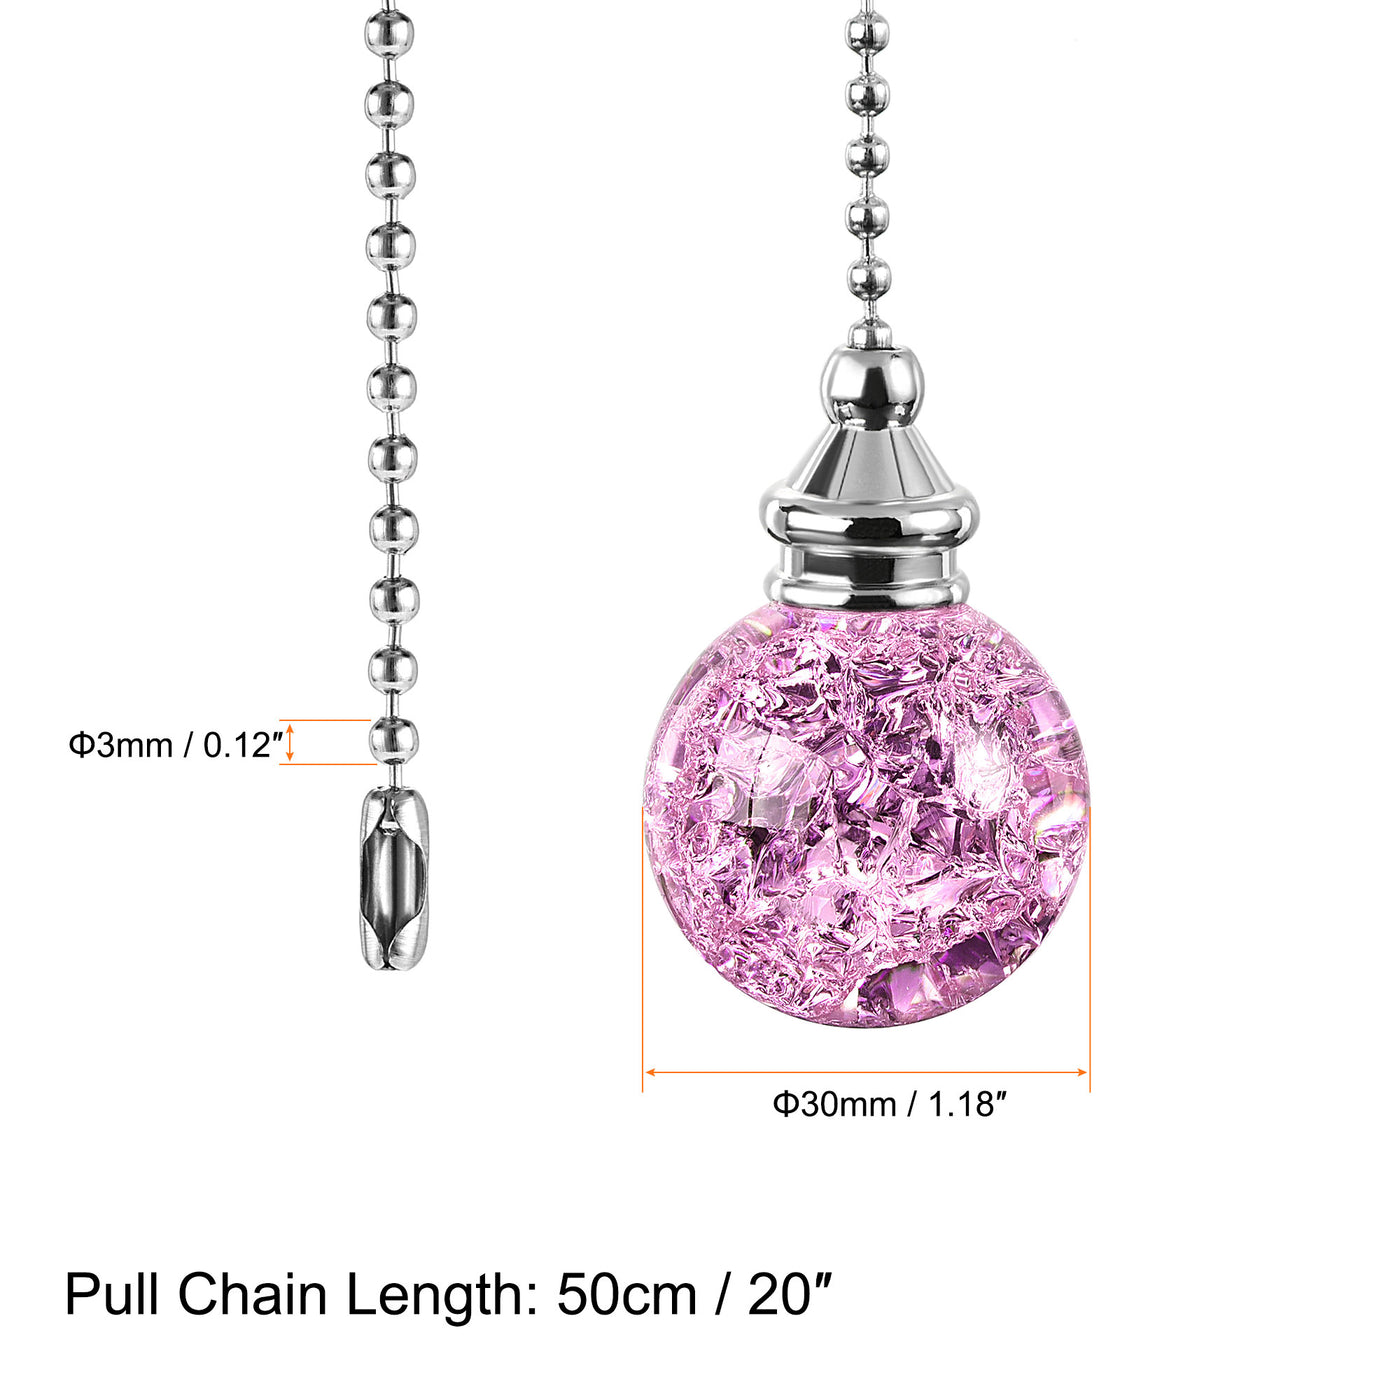 uxcell Uxcell 20 Inch Ceiling Fan Pull Chain, Decorative Crystal Fan Pull Chain Ornament Extension, 3mm Diameter Beaded 30mm Ice Cracked Ball Pendant, Pink 2Pcs